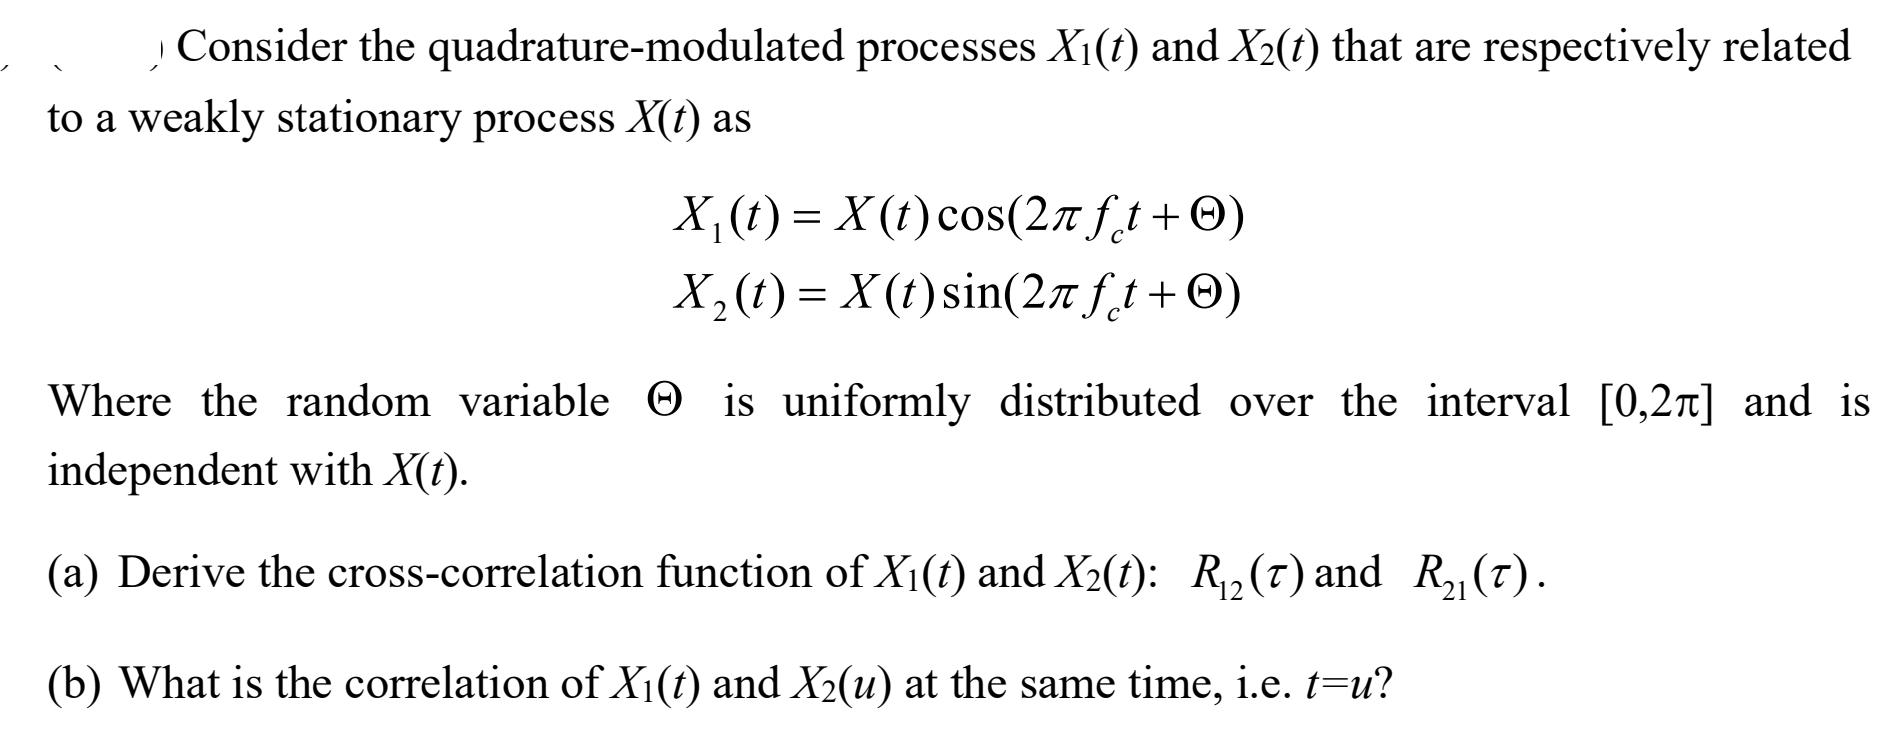 Consider the quadrature-modulated processes X(t) and X(t) that are respectively related to a weakly